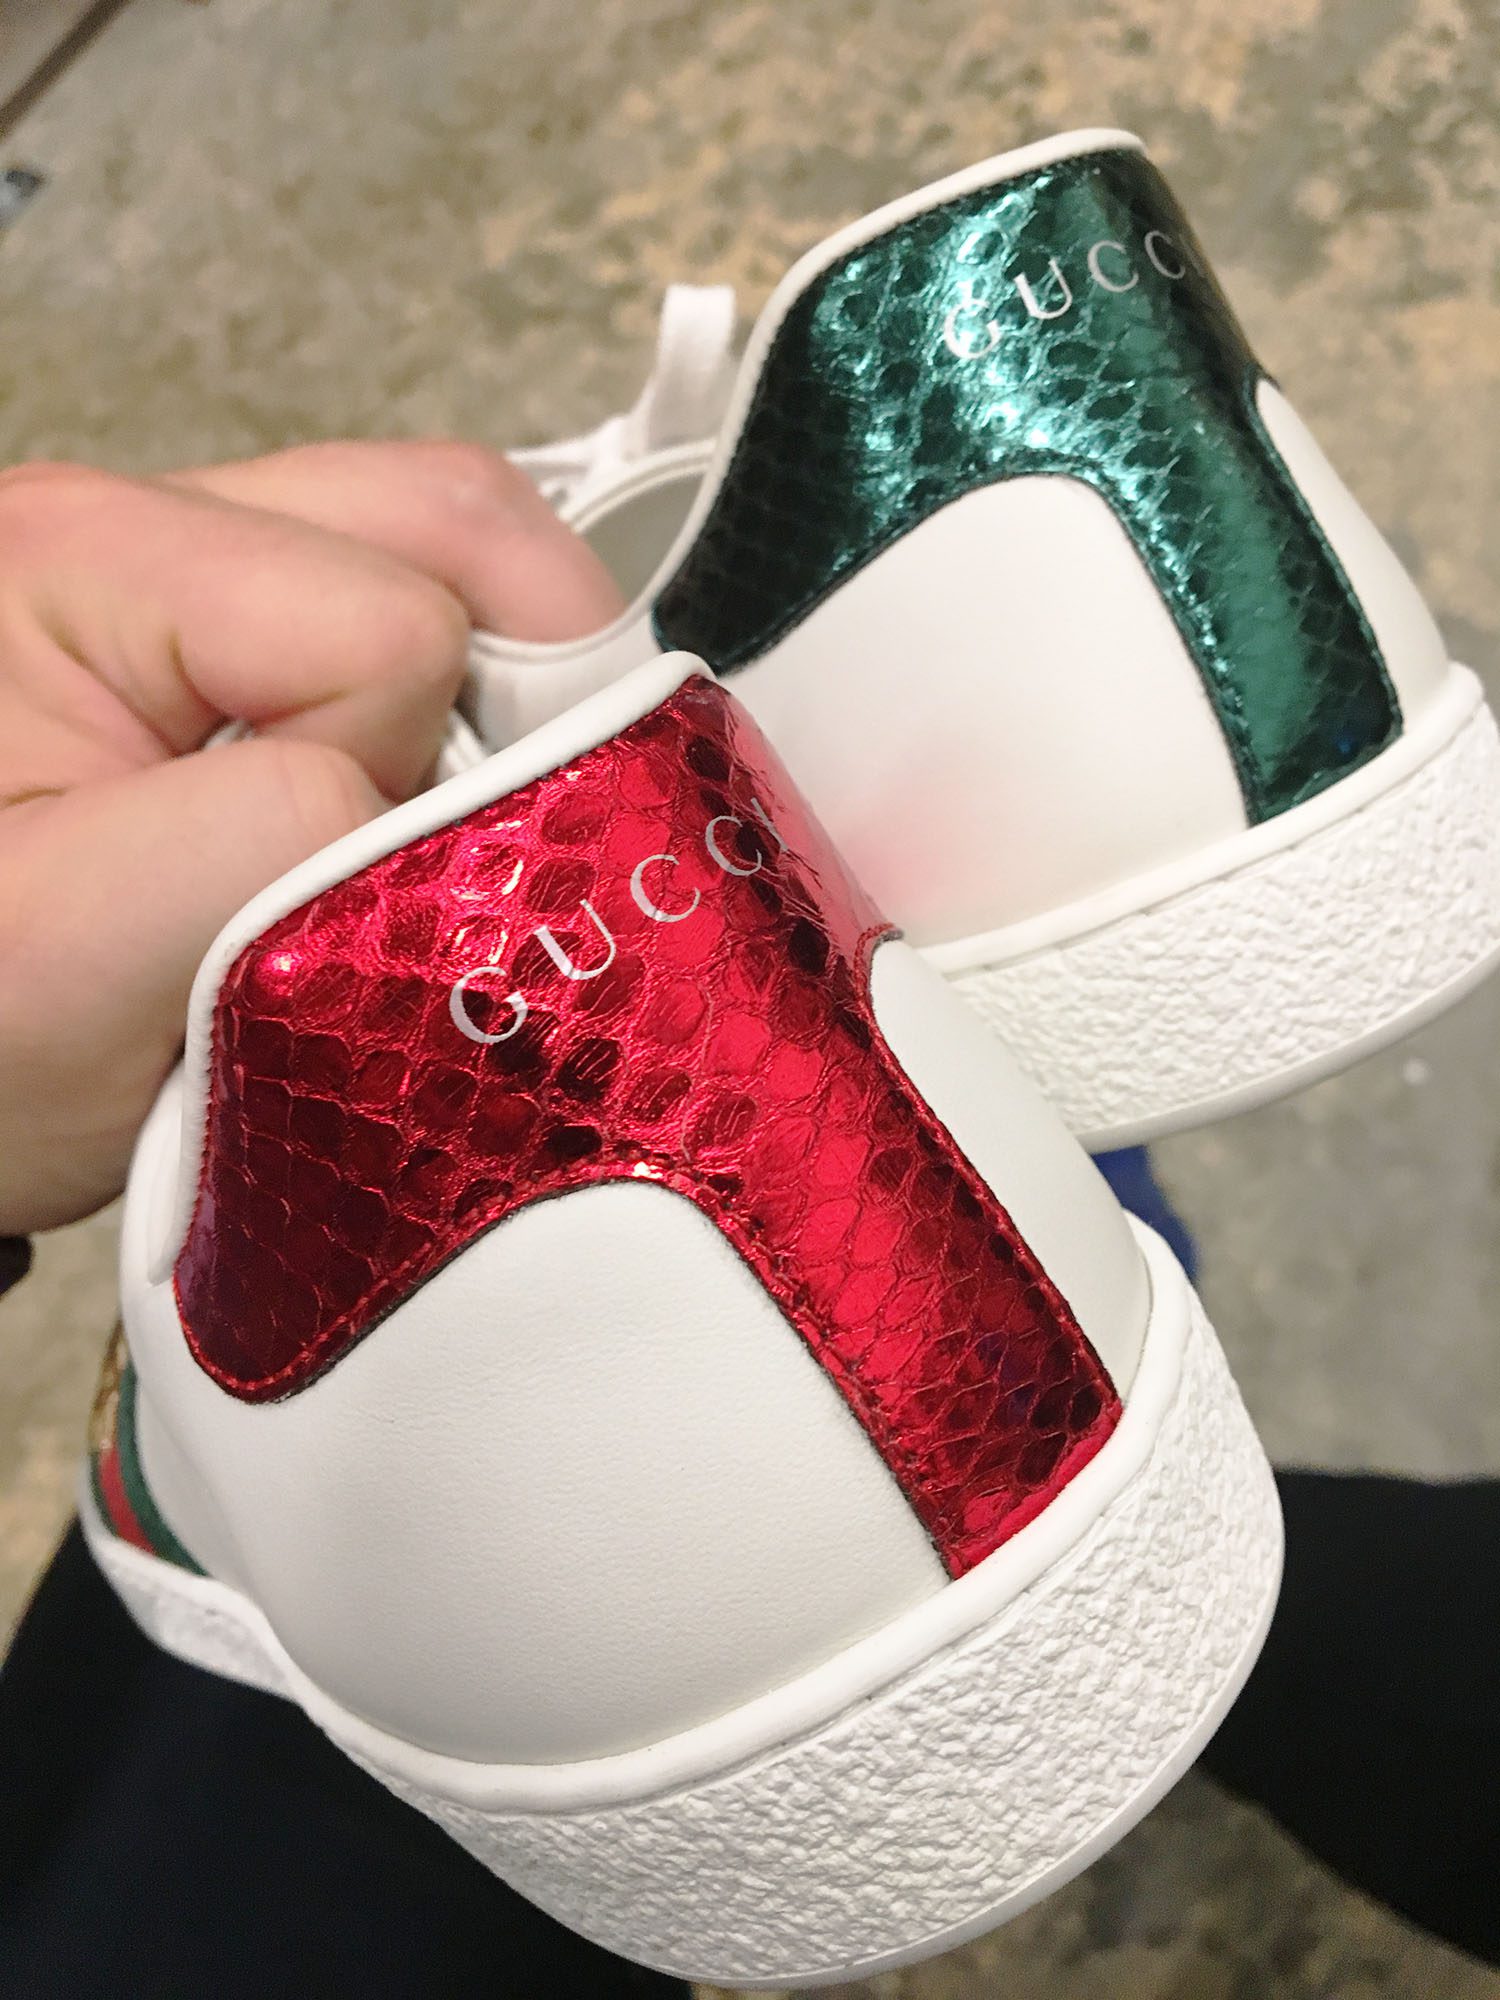 Gucci Ace Sneakers Review: Are They Really Worth It? - Life with Mar